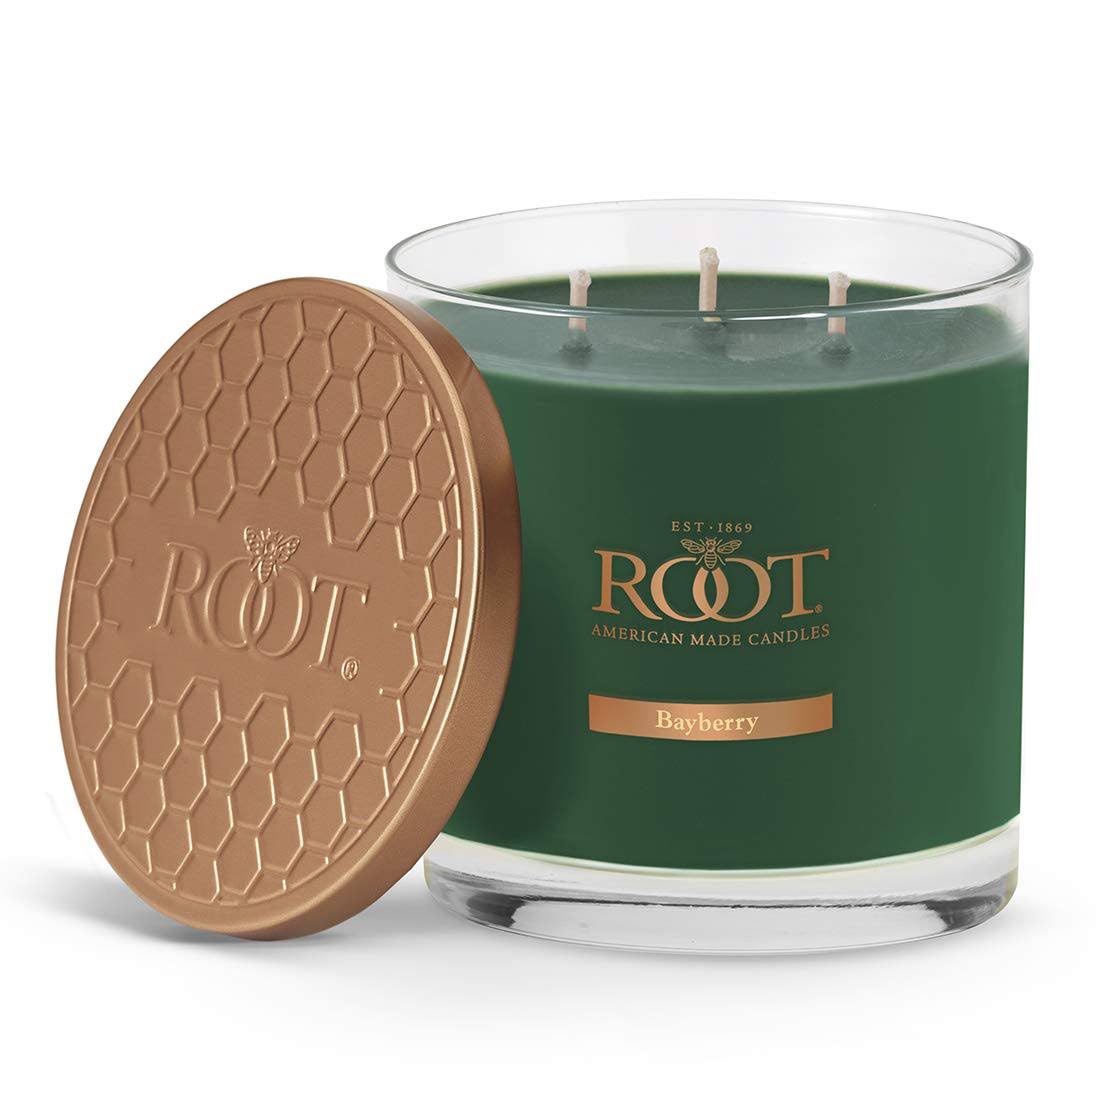 Root Candle, Bayberry - 1 candle, 12 oz